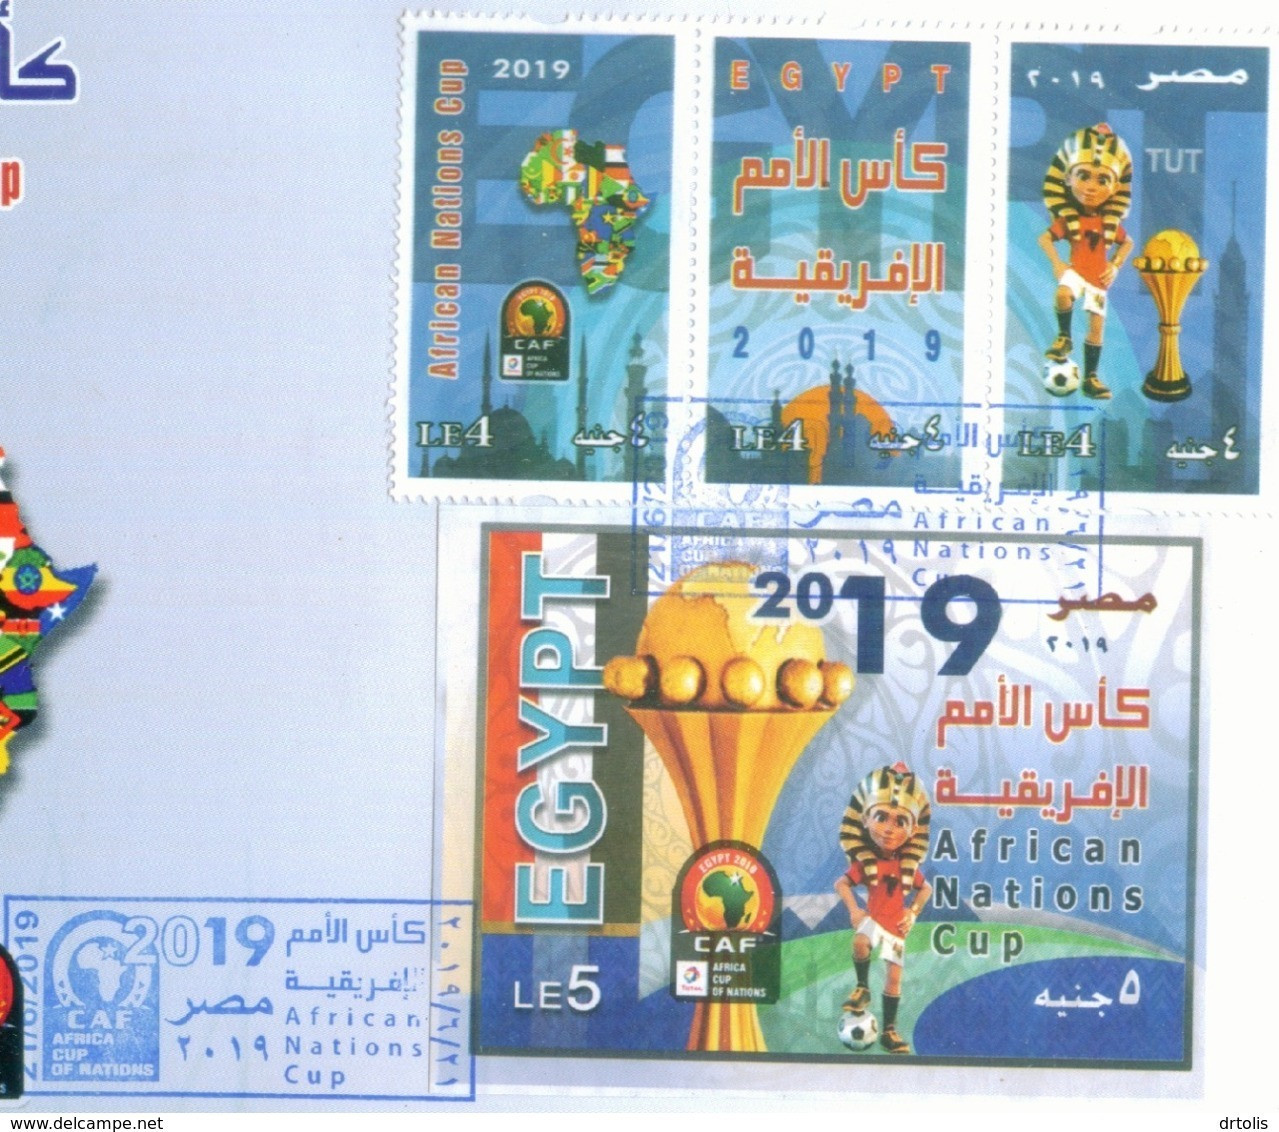 EGYPT / 2019 / AFRICAN NATIONS CUP / SPORT / FOOTBALL / CAF / MAP / FLAG / TUT / FDC - Storia Postale